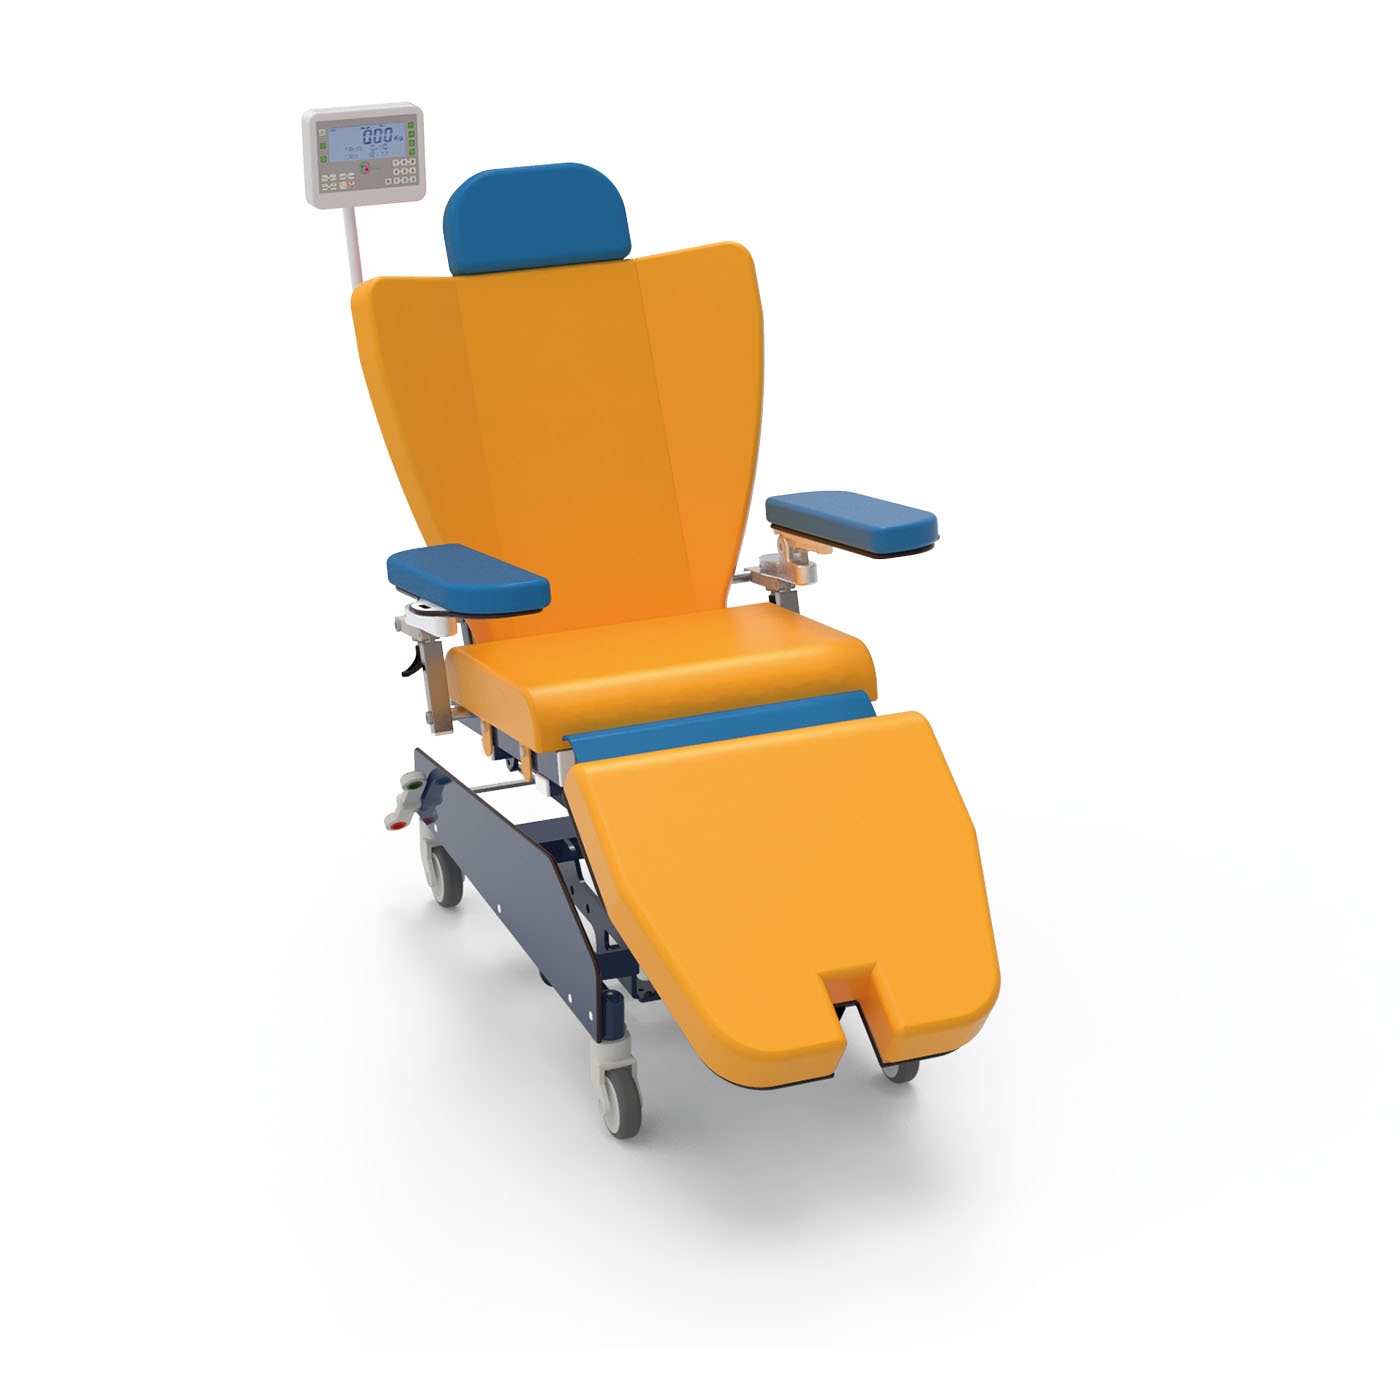 Paediatric chairs with integrated scale